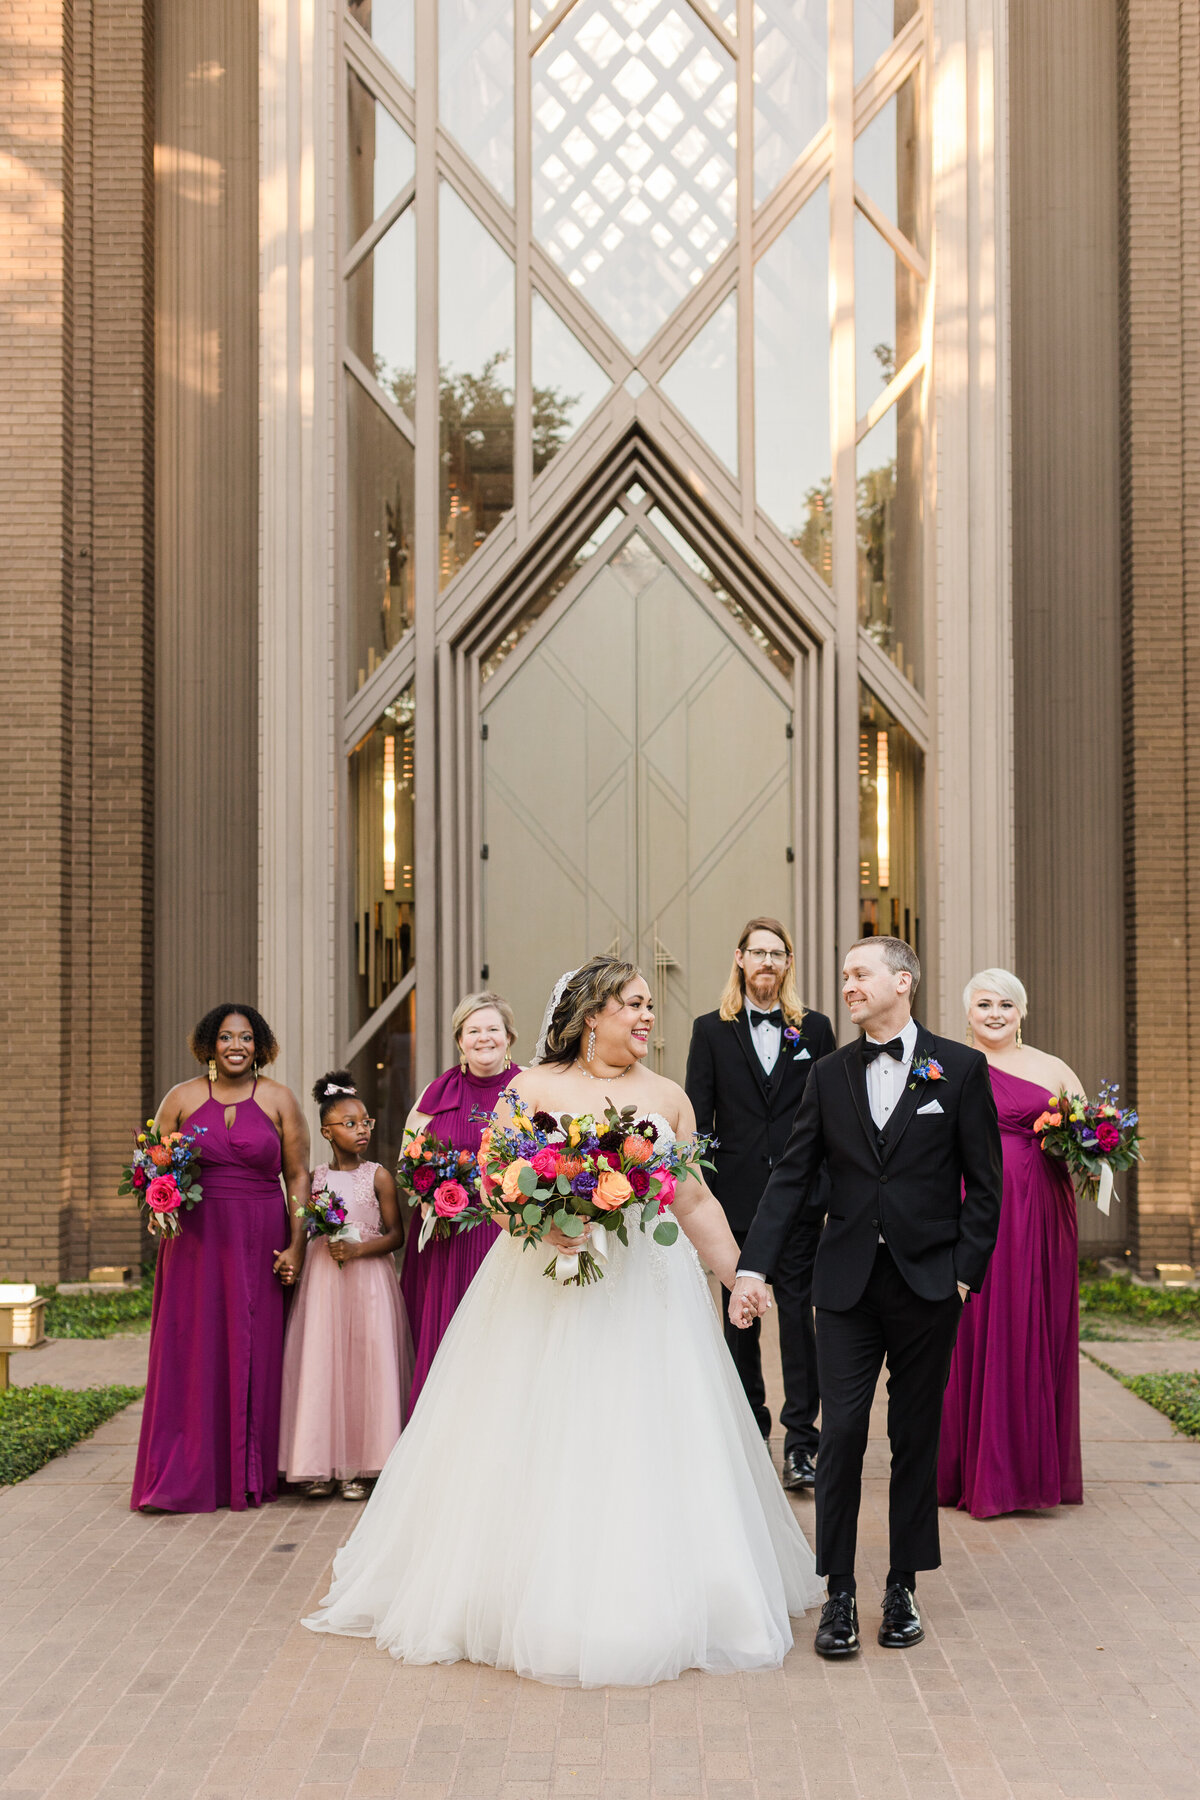 Portrait of a bride, groom, and their wedding party posing outside of the beautiful Marty Leonard Community Chapel in Fort Worth, Texas. The bride is on the left and is wearing a flowing, white, sleeveless dress with a long view and is holding a large, colorful bouquet. The groom is on the right and is wearing a black tuxedo with a bowtie and a boutonniere. The women in the wedding party are wedding burgundy or light pink dresses and all have bouquets. The one man in the wedding party is wearing a black tuxedo with a bowtie and boutonniere.